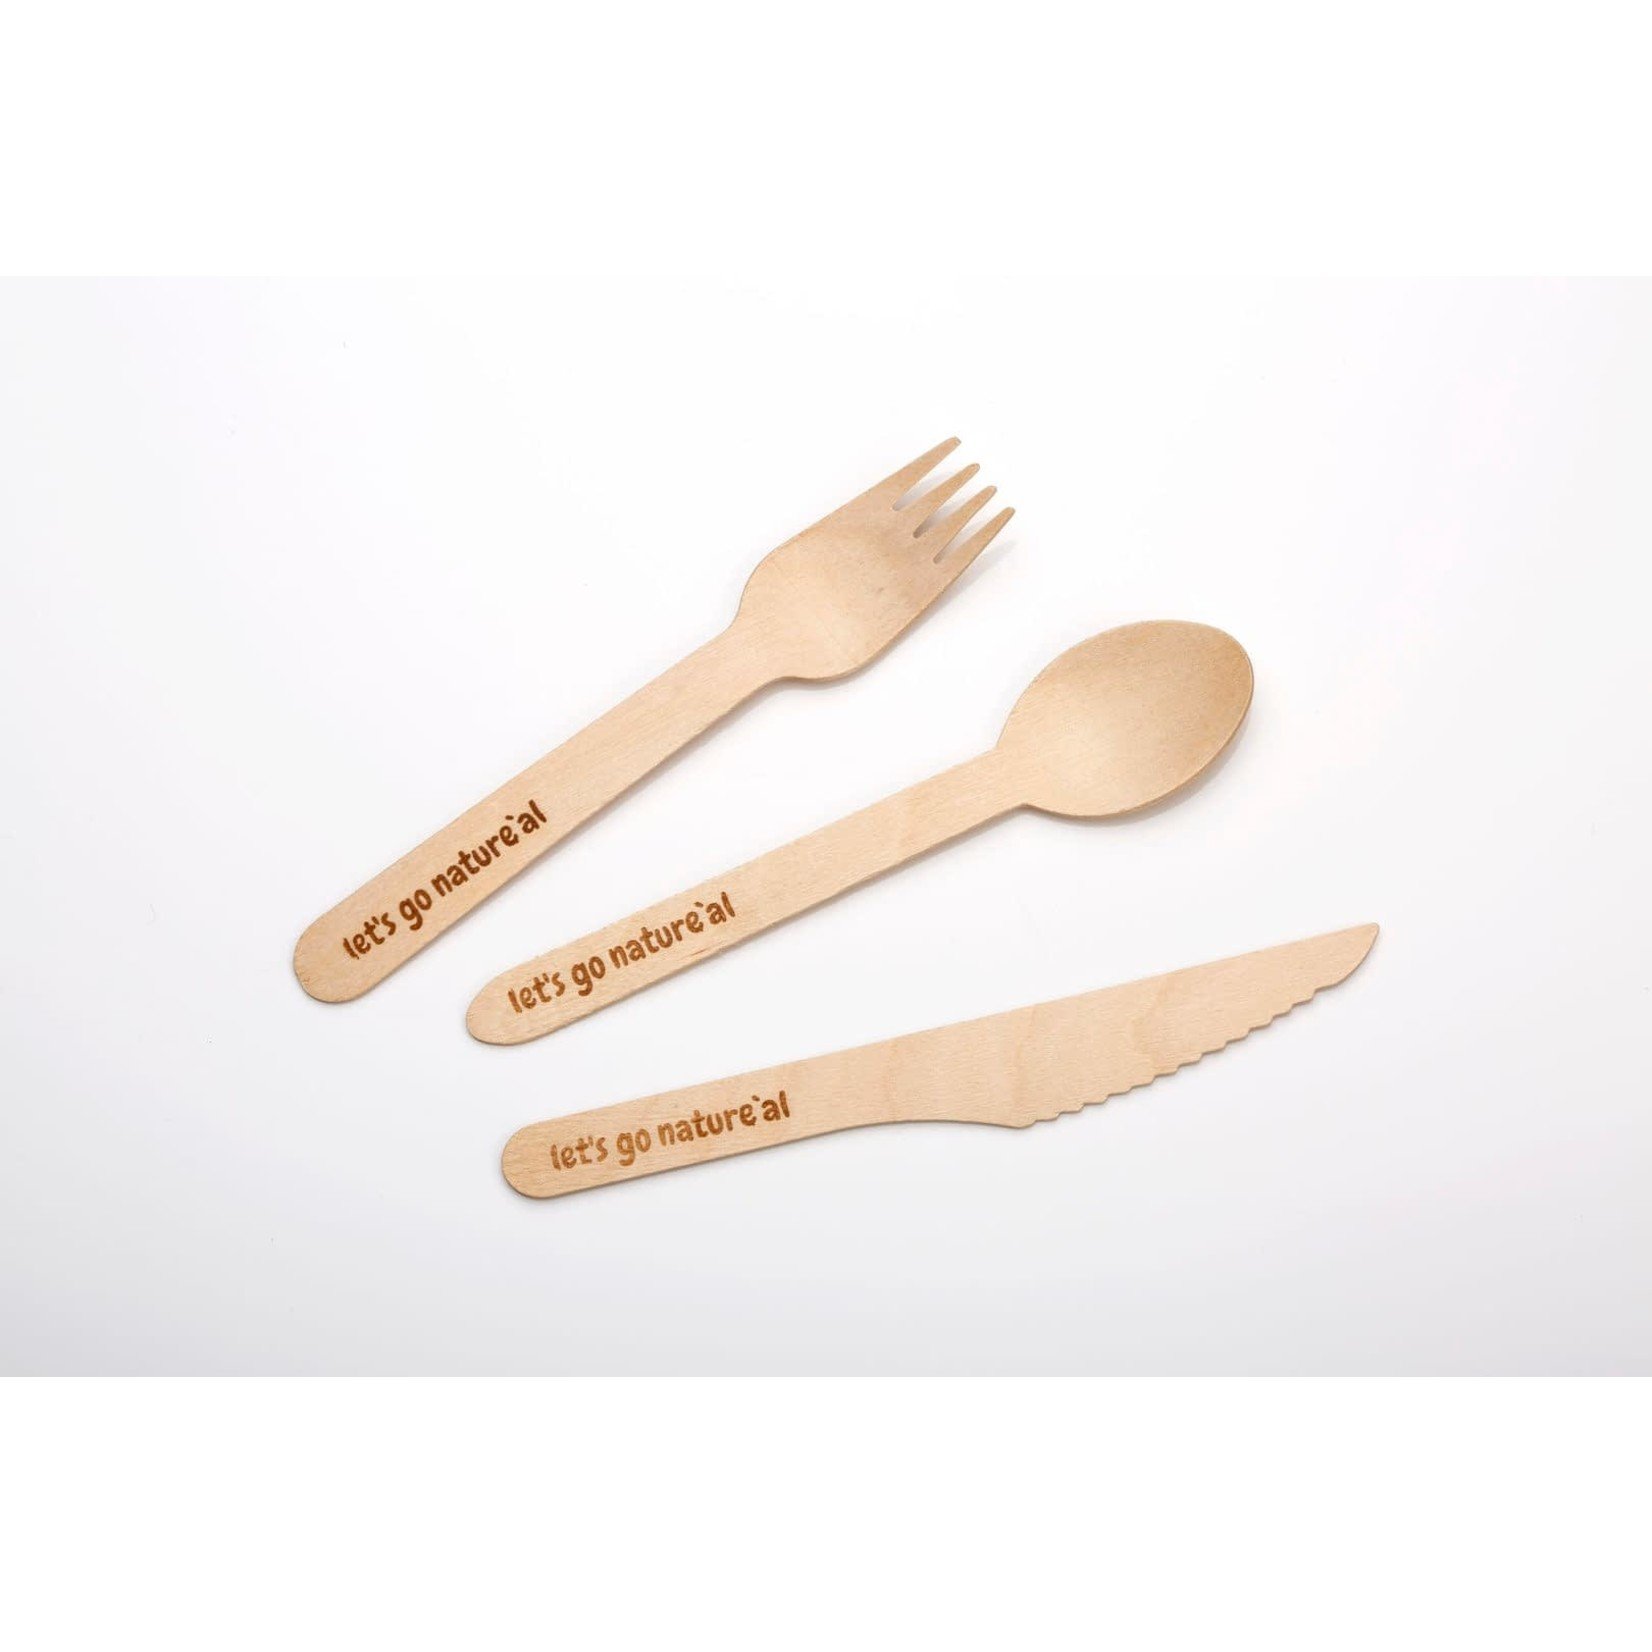 Let's Go Nature'al Let's Go Natureal Single Use Cutlery 36pk